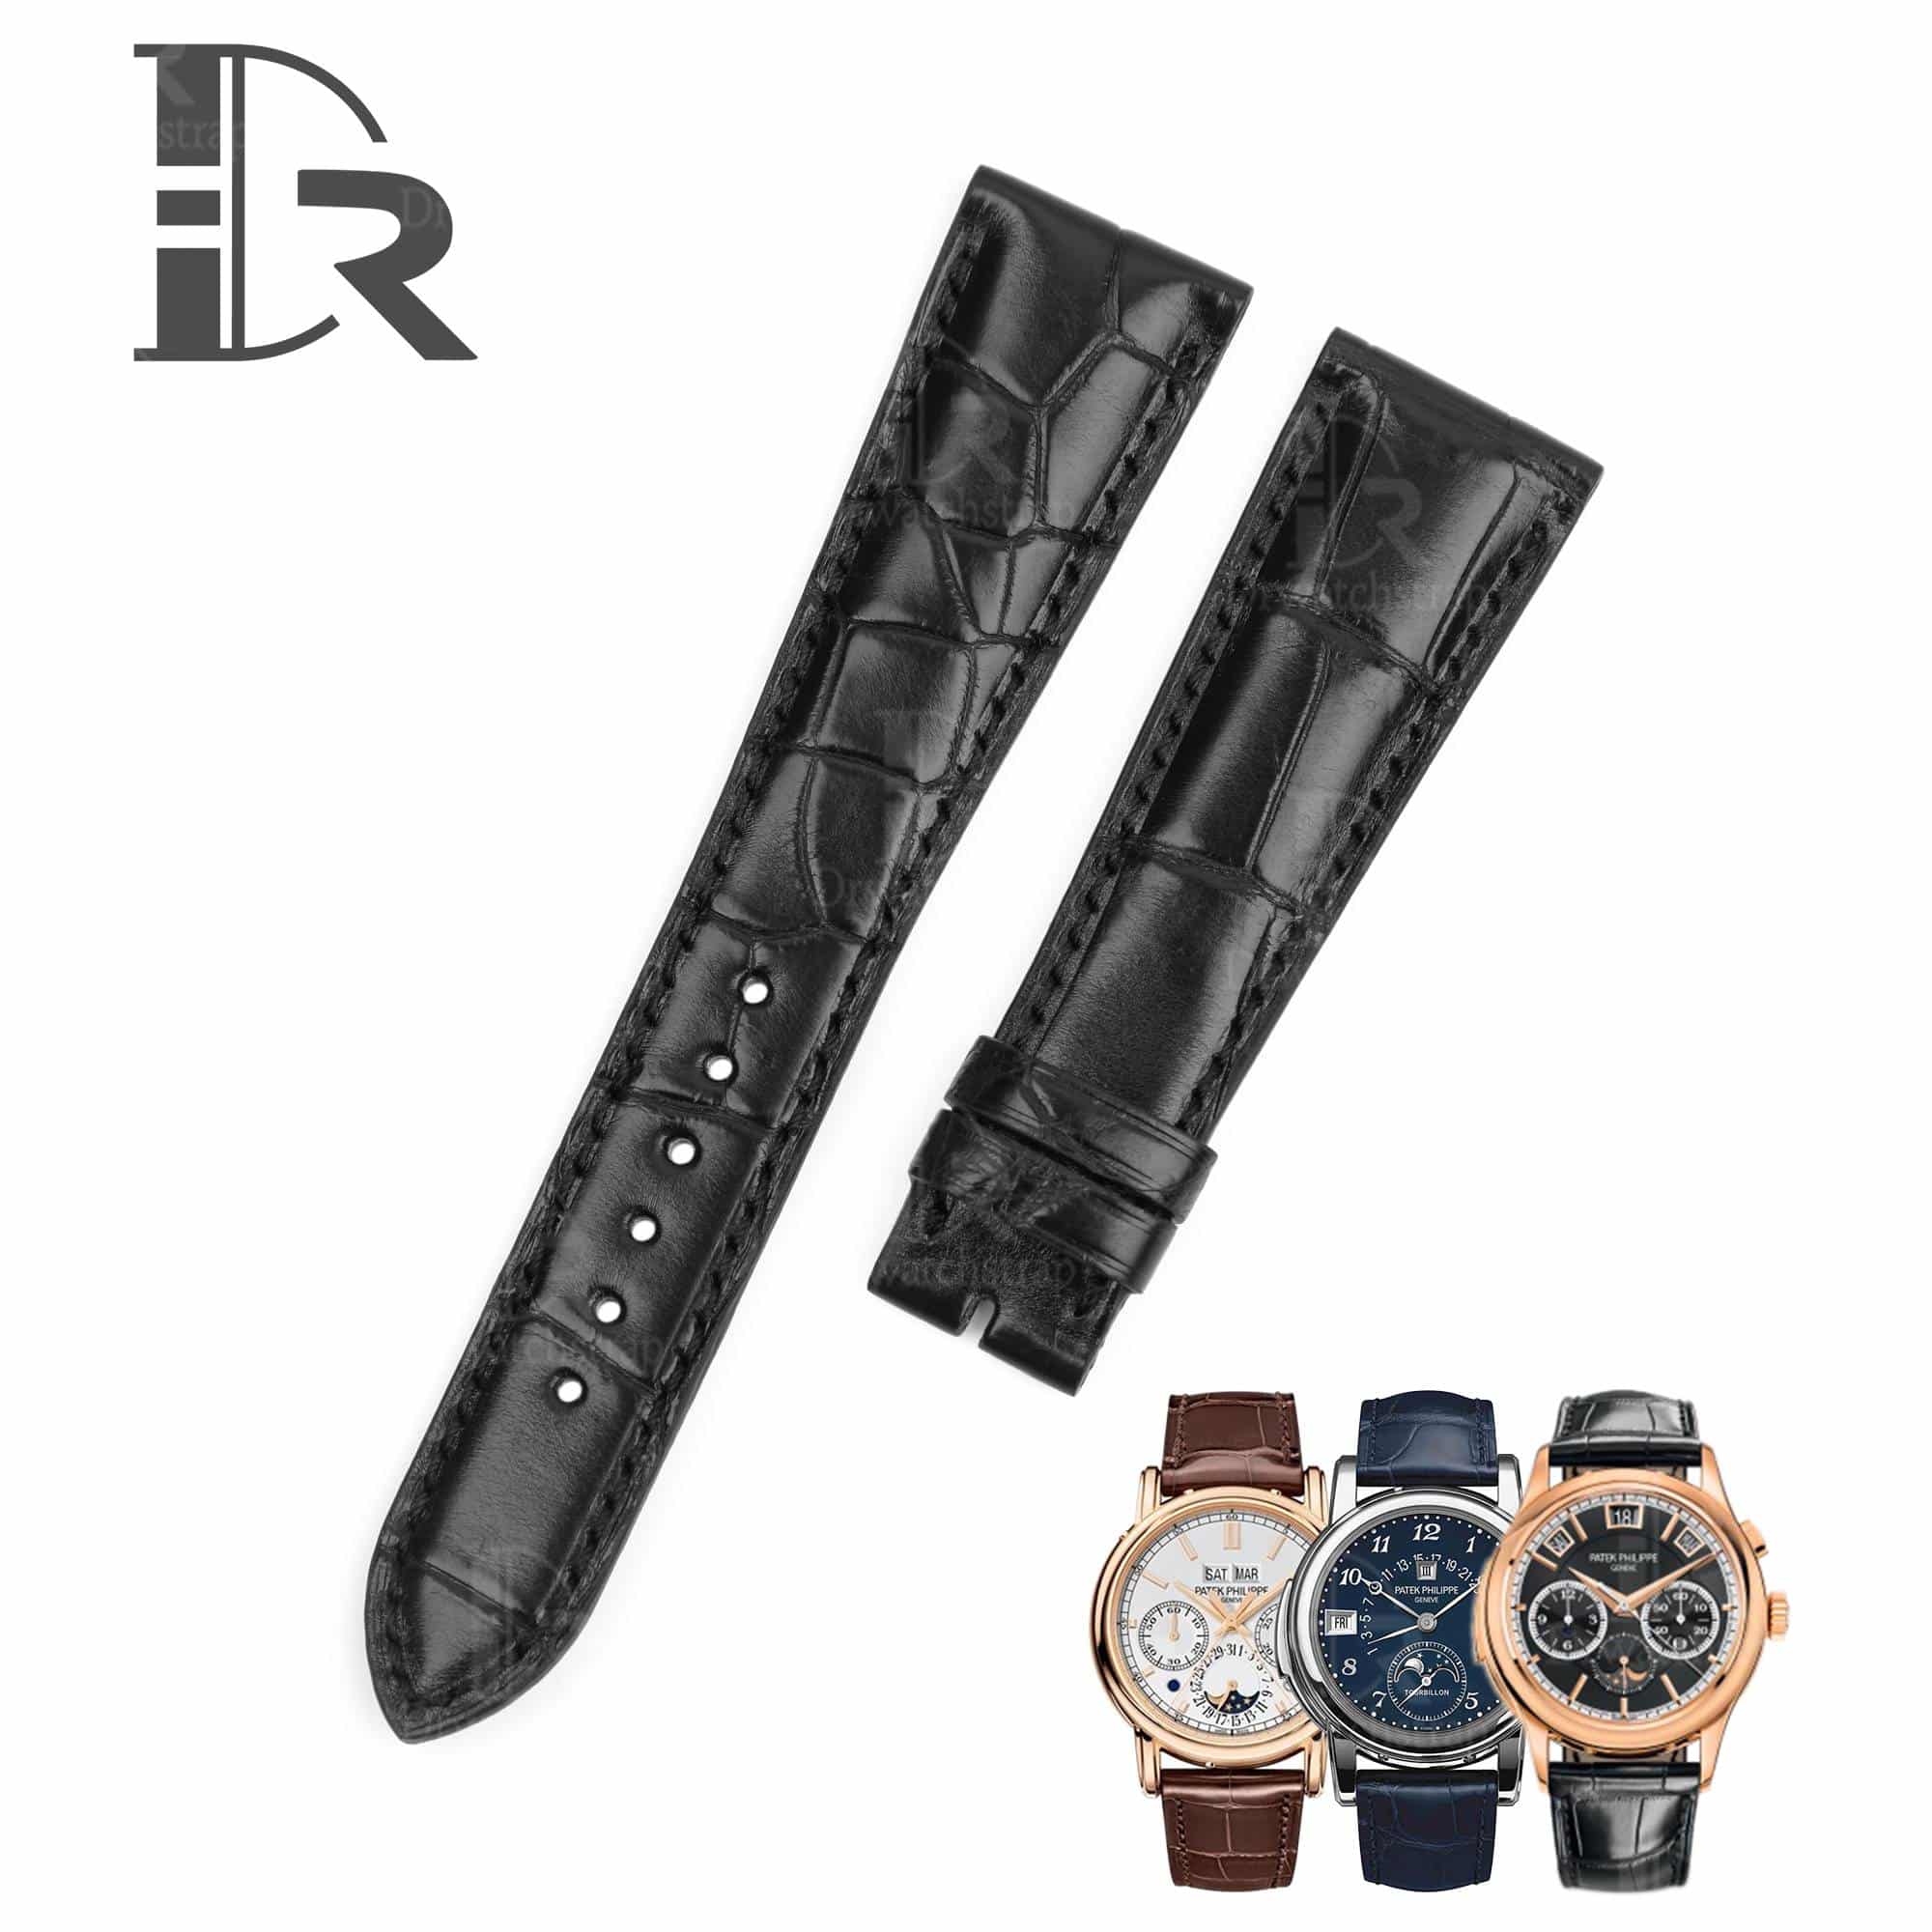 Buy replacement Patek Philippe black leather strap high-end quality American Alligator at discount price 12mm 14mm 16mm 18mm 19mm 20mm 21mm 22mm 23mm 24mm